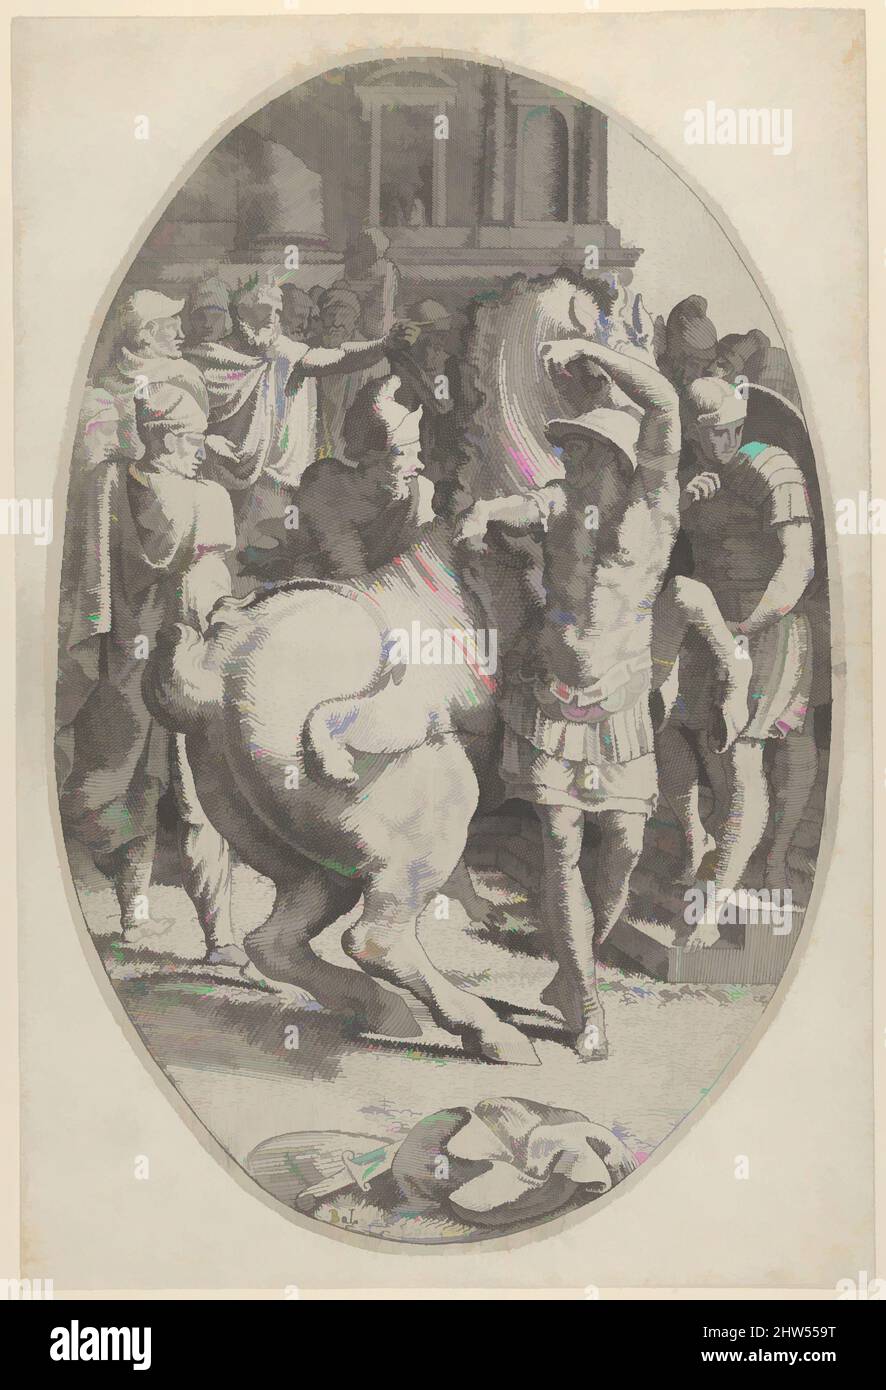 Art inspired by Alexander Mastering Bucephalus, ca. 1540–45, Etching, Sheet: 14 1/2 × 9 3/4 in. (36.8 × 24.7 cm), Prints, Léon Davent (French, active 1540–56), After Francesco Primaticcio (Italian, Bologna 1504/5–1570 Paris, Classic works modernized by Artotop with a splash of modernity. Shapes, color and value, eye-catching visual impact on art. Emotions through freedom of artworks in a contemporary way. A timeless message pursuing a wildly creative new direction. Artists turning to the digital medium and creating the Artotop NFT Stock Photo